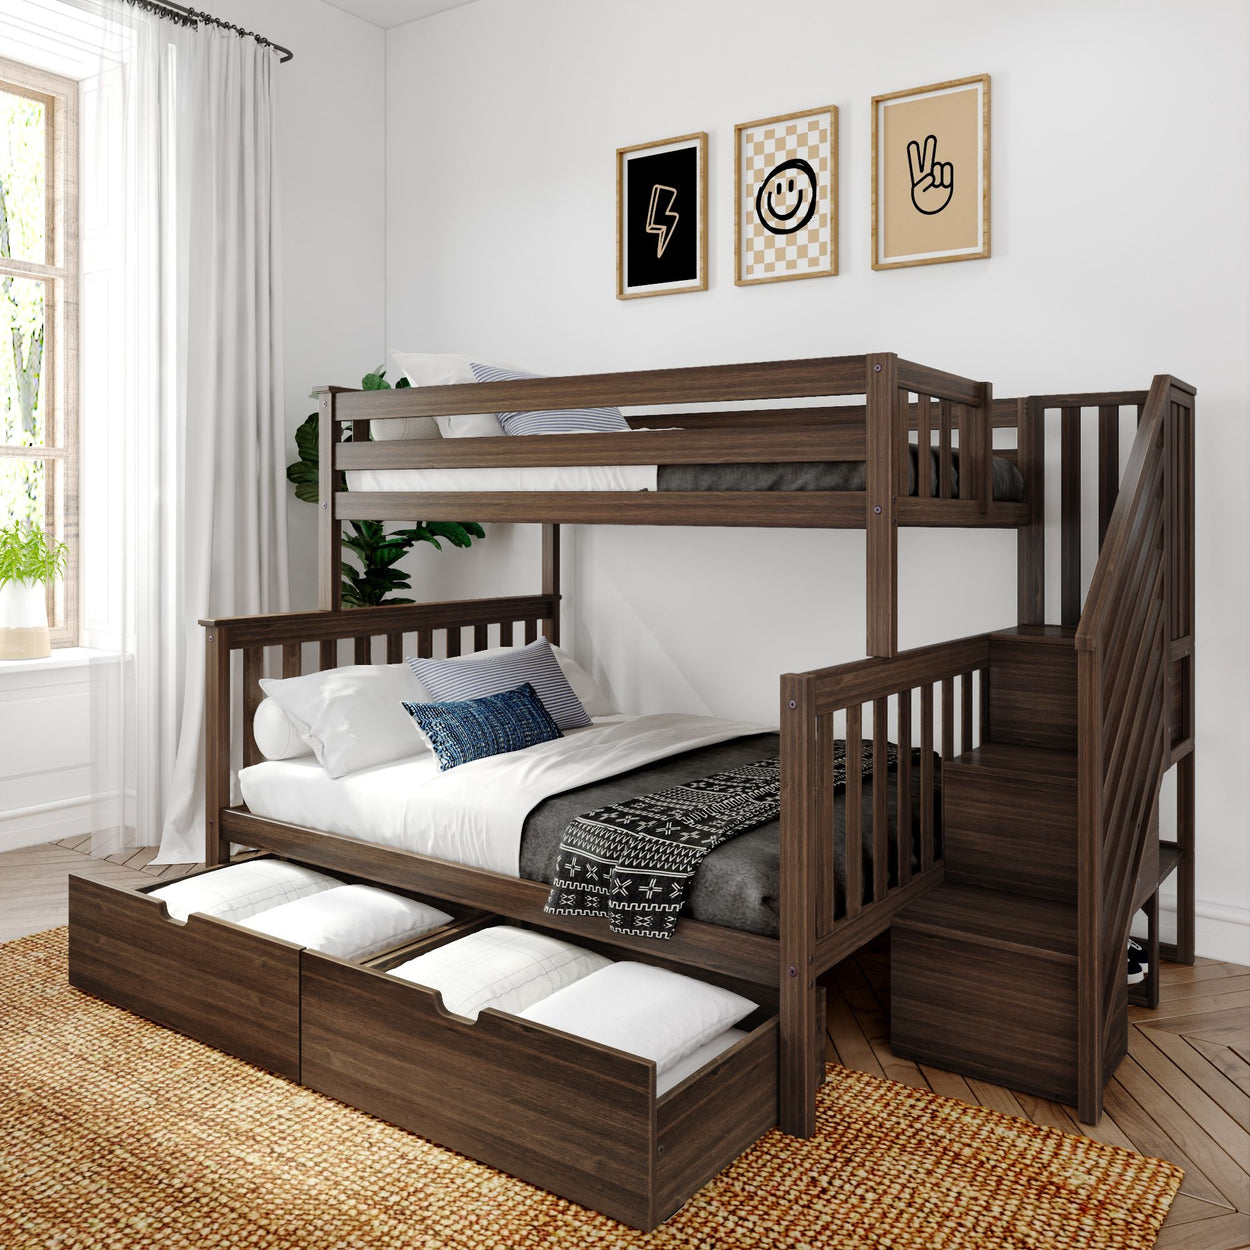 187235-008 : Bunk Beds Twin Over Full Staircase Bunk With Storage Drawers, Walnut